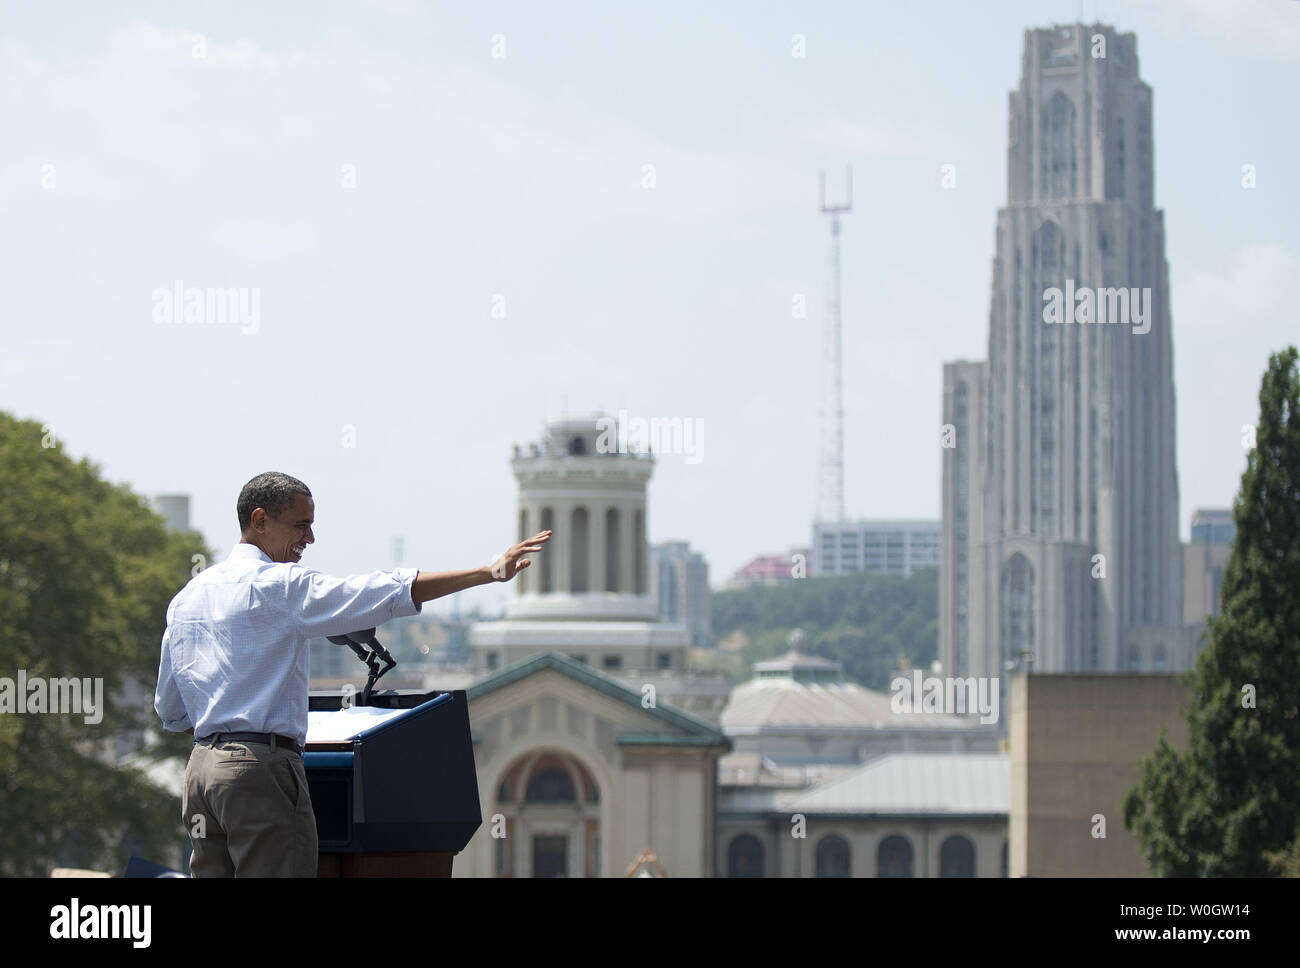 President Barack Obama delivers remarks at a campaign on the campus of Carnegie Mellon University in Pittsburgh, Pennsylvania on July 6, 2012. President Obama is on the second day of his, 'Betting on America' bus tour through Ohio and Pennsylvania.  The tall building in the background is the Cathedral of Learning on the University of Pittsburgh campus.  UPI/Kevin Dietsch Stock Photo